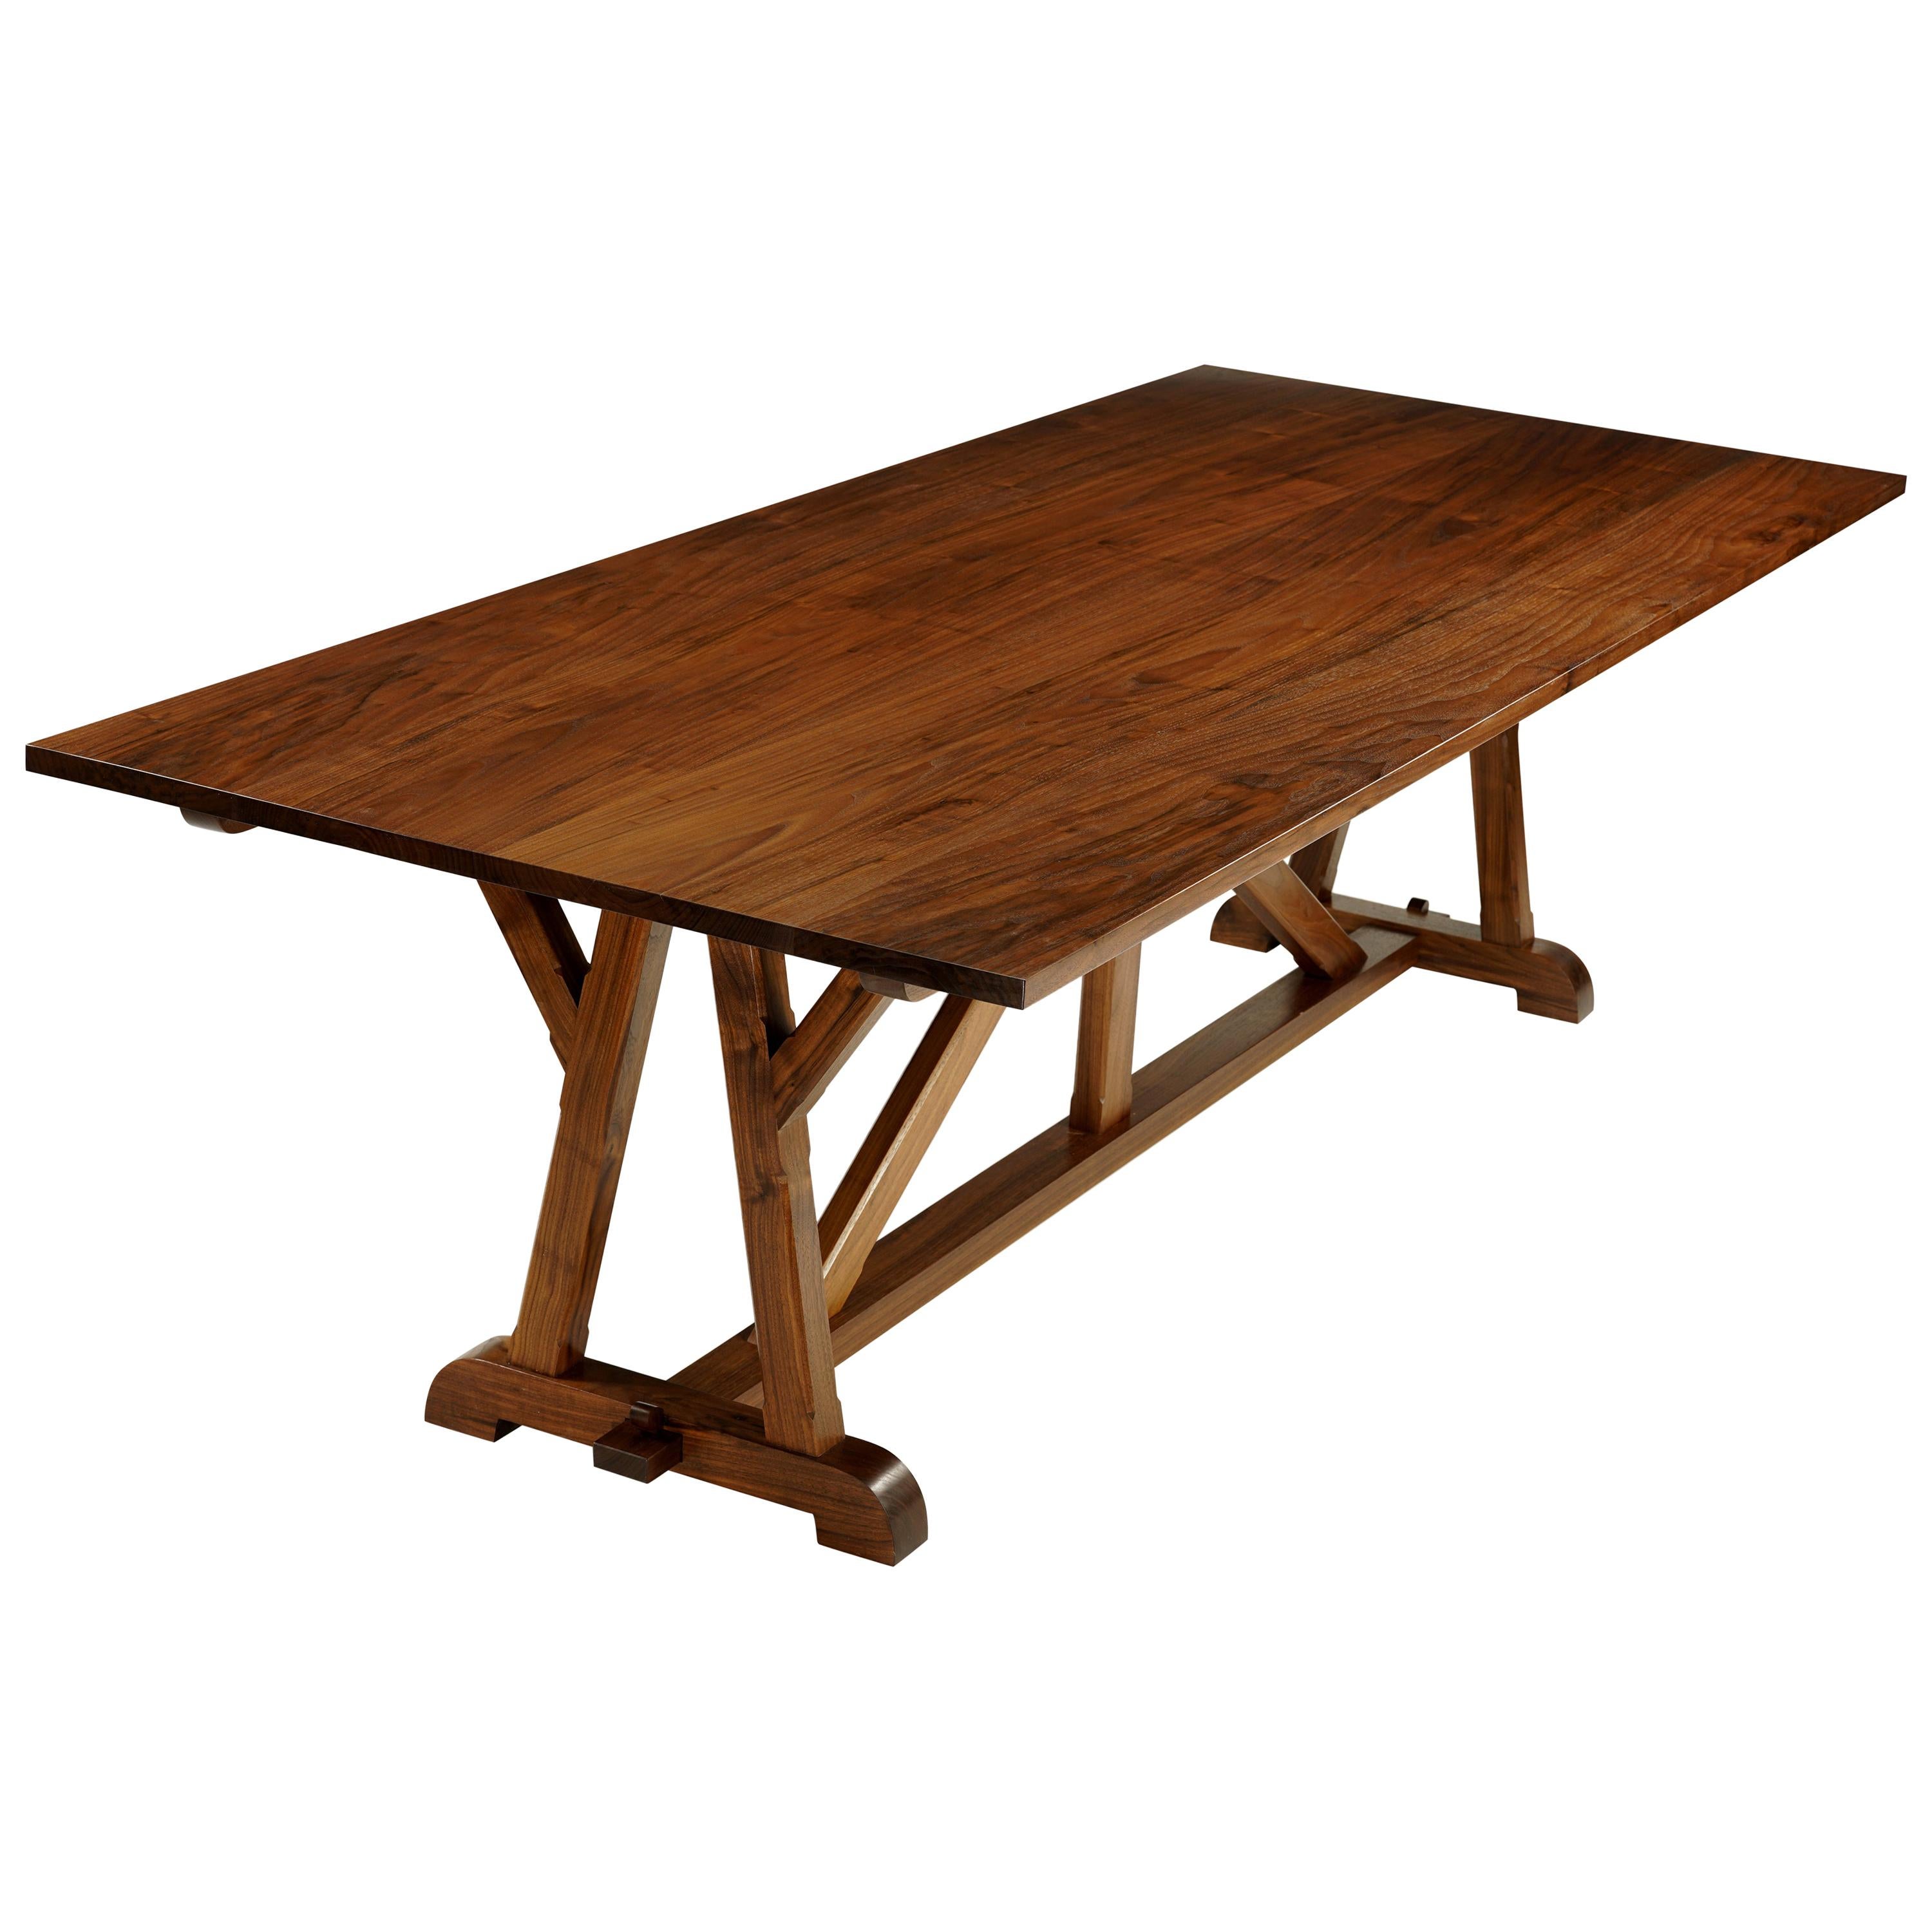 "Architects Table" Classic Arts & Crafts Dining Table in Walnut For Sale